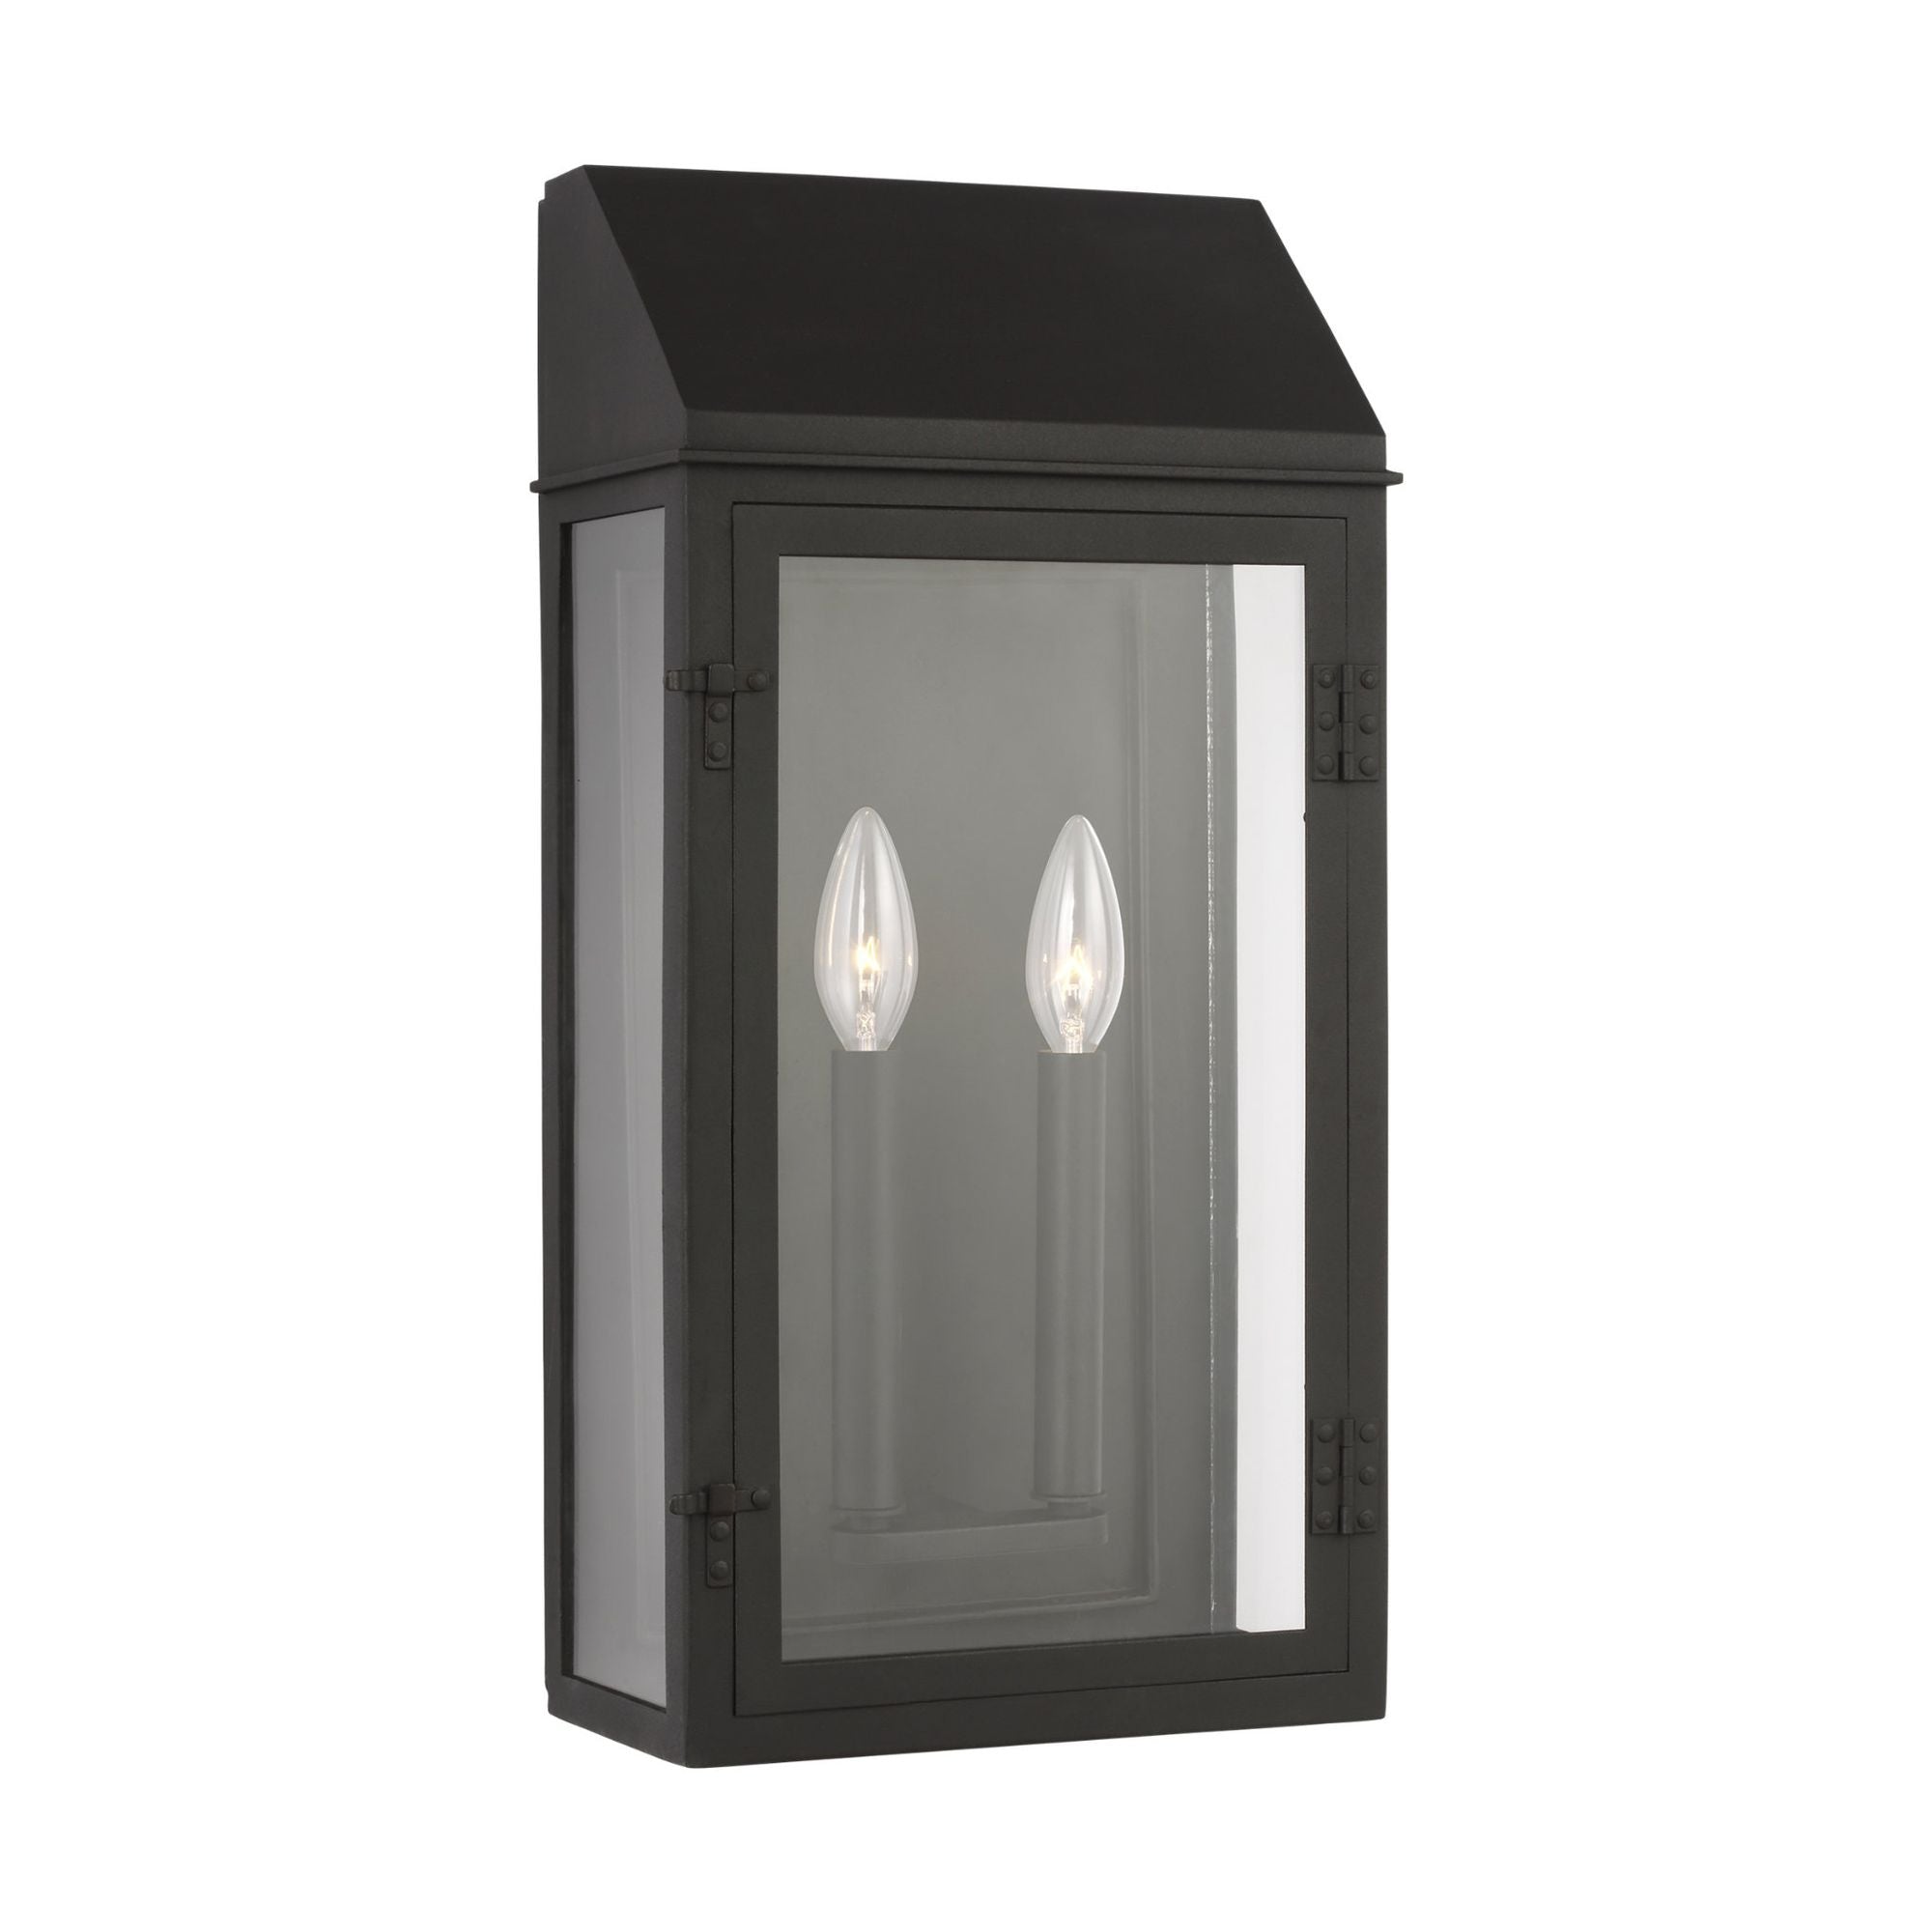 Chapman & Myers Hingham Large Outdoor Wall Lantern in Textured Black